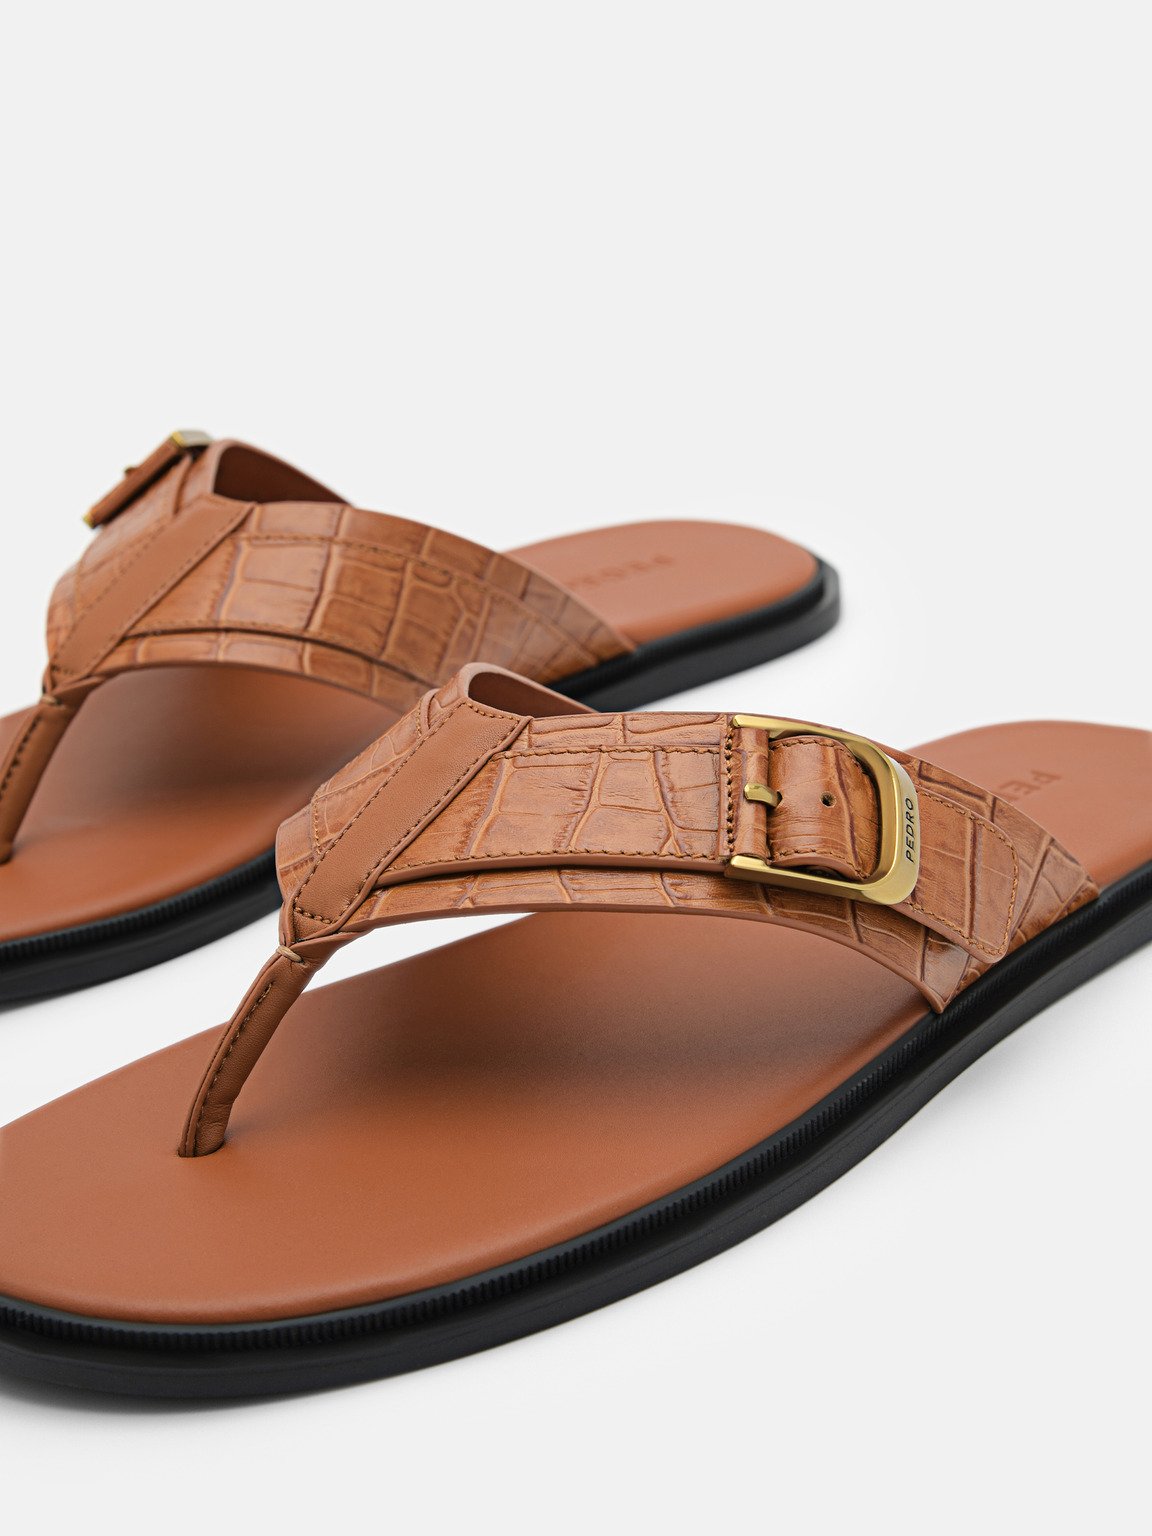 Helix Leather Thong Sandals, Camel